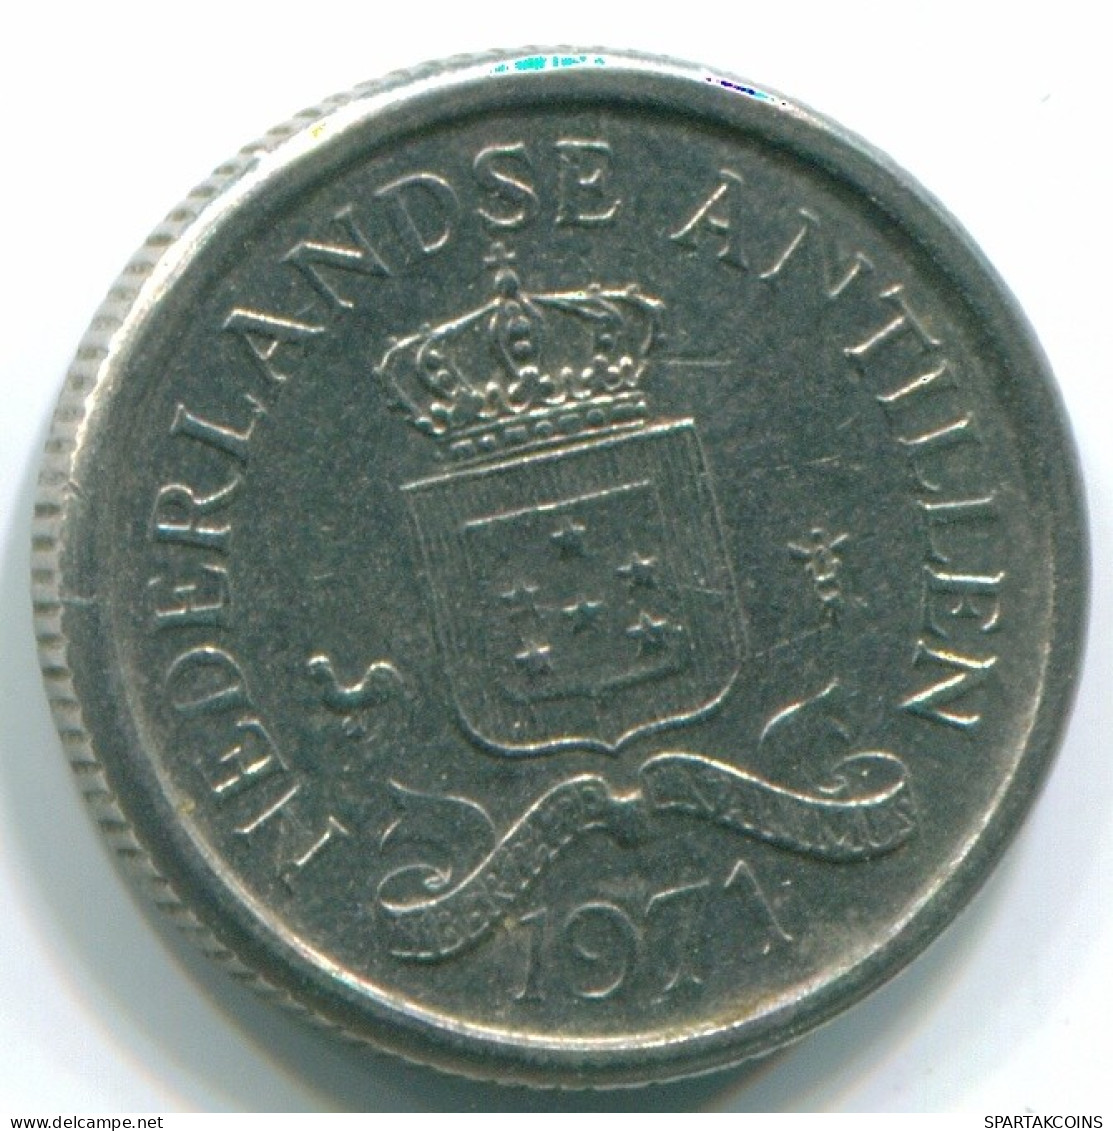 10 CENTS 1971 NETHERLANDS ANTILLES Nickel Colonial Coin #S13452.U.A - Netherlands Antilles